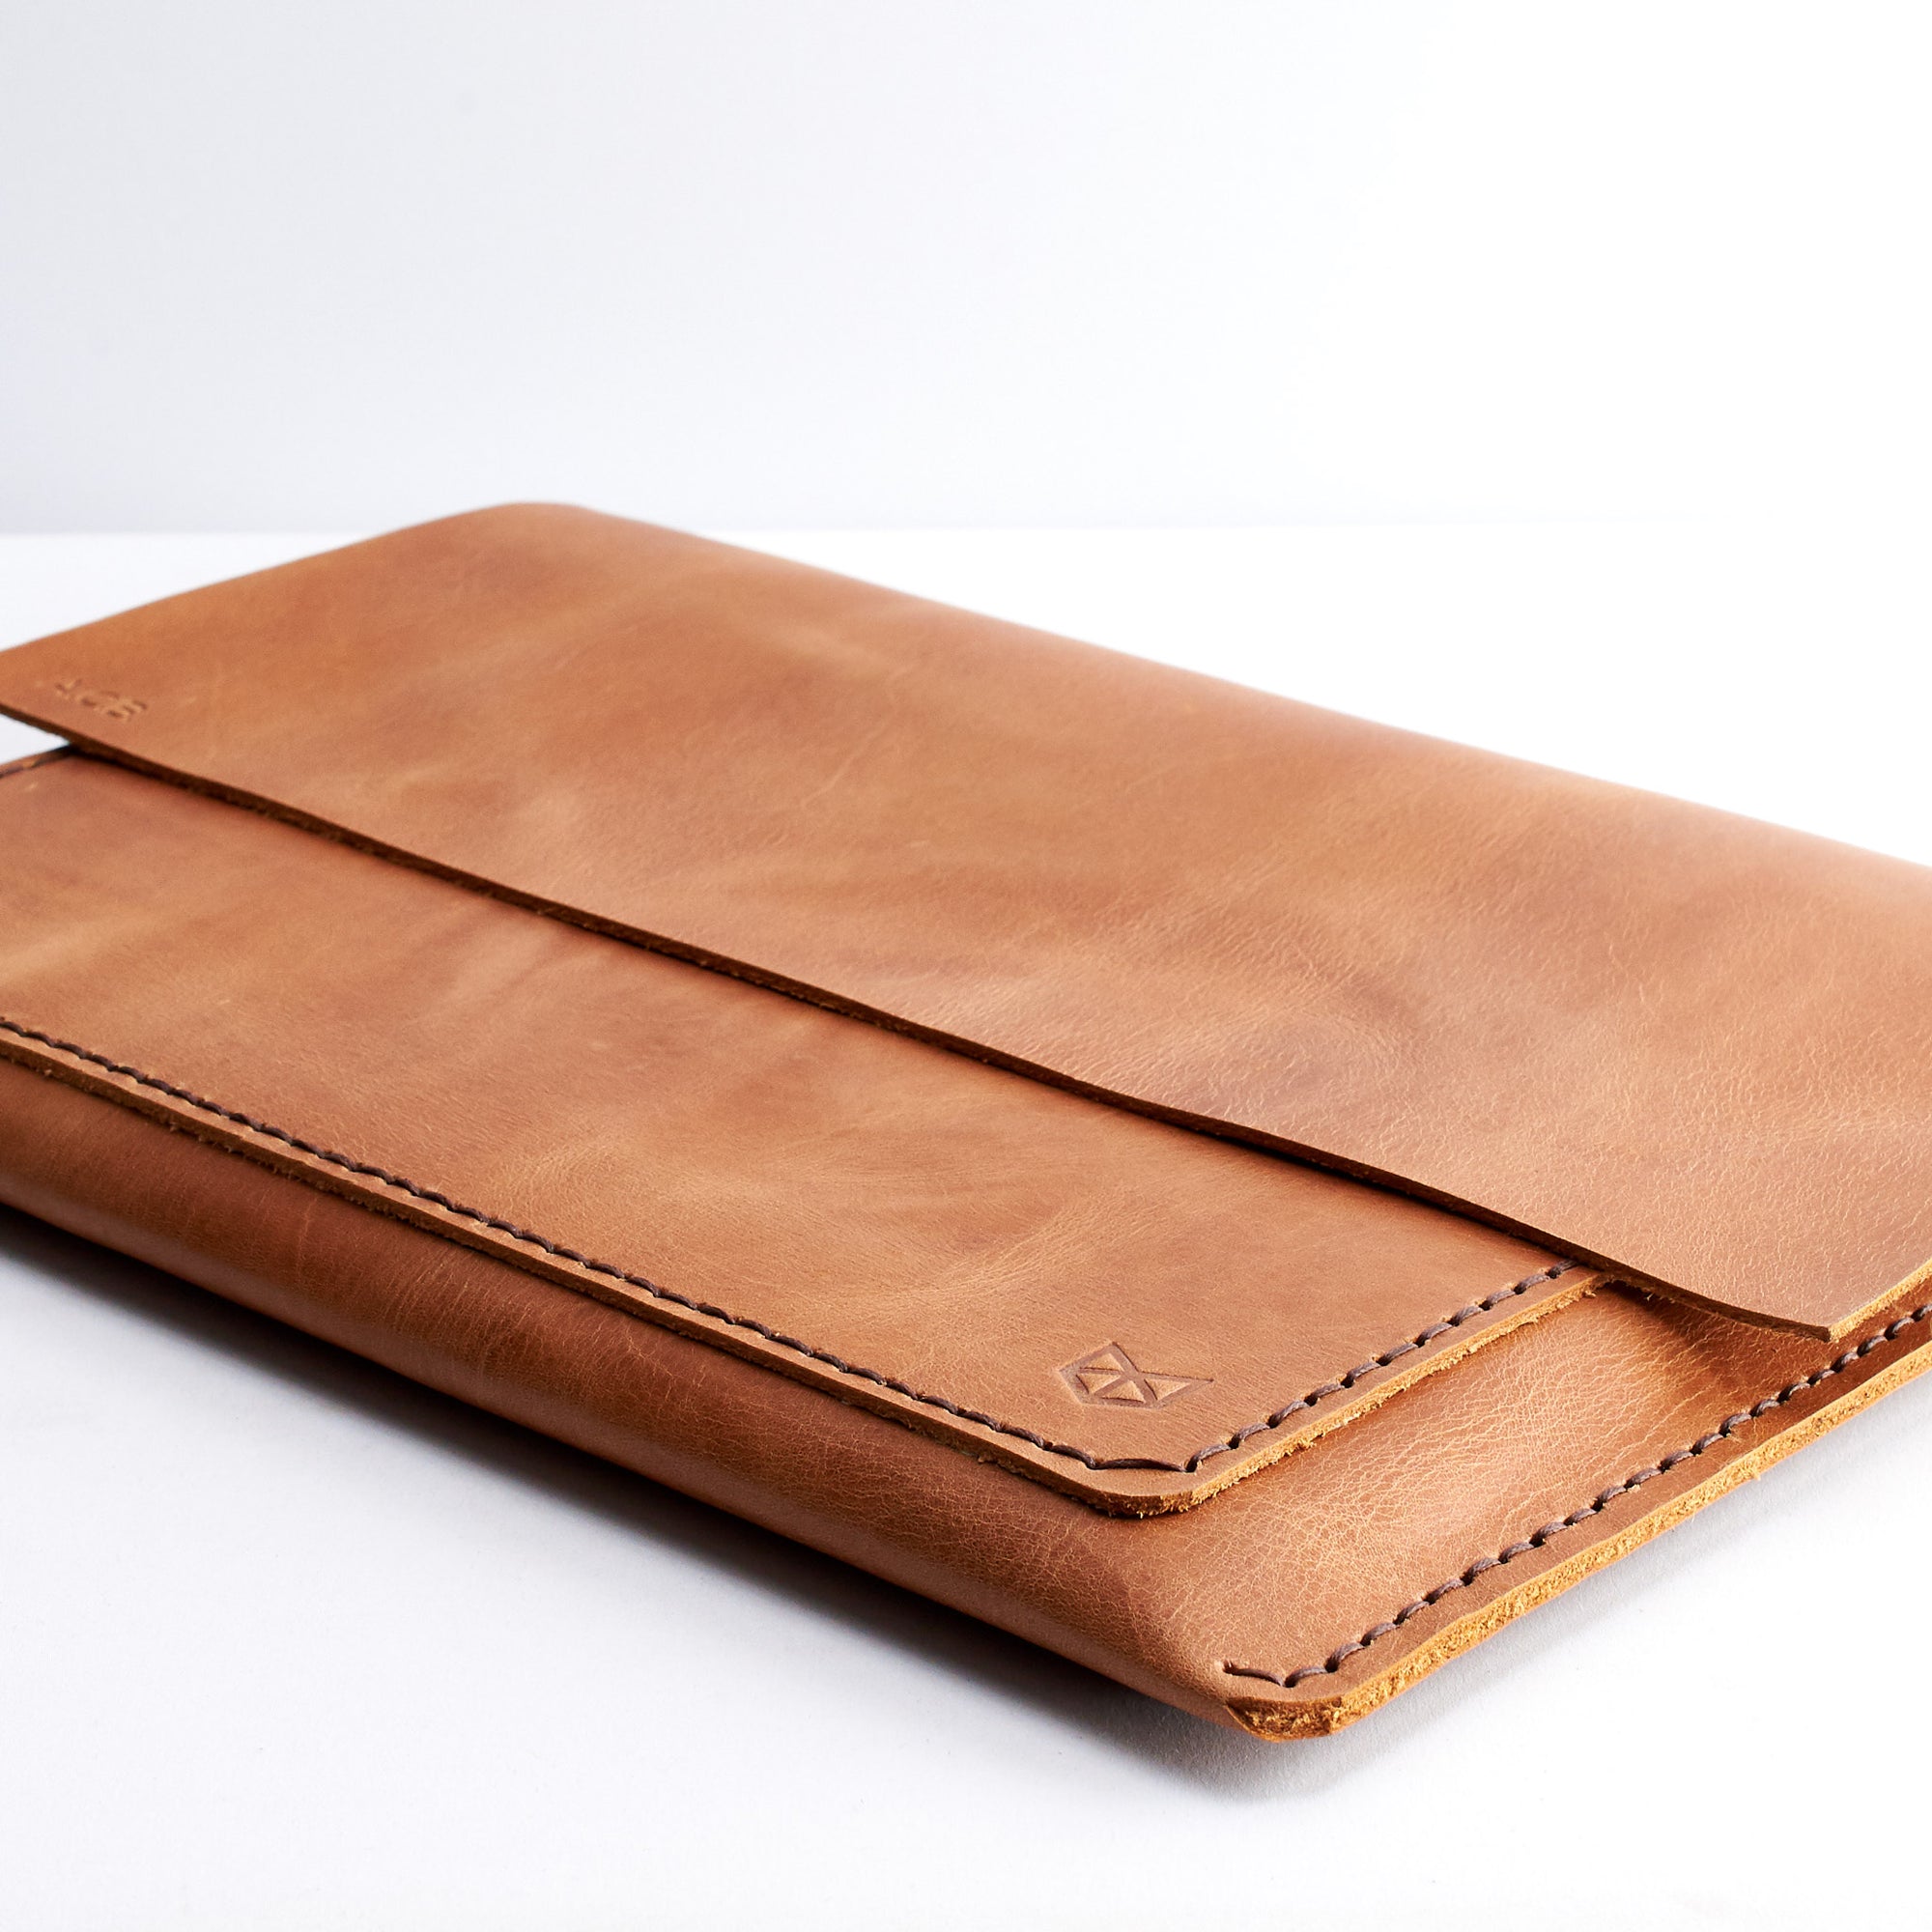 Hand Stitched. Tan Leather MacBook Case. Postman MacBook Sleeve by Capra Leather